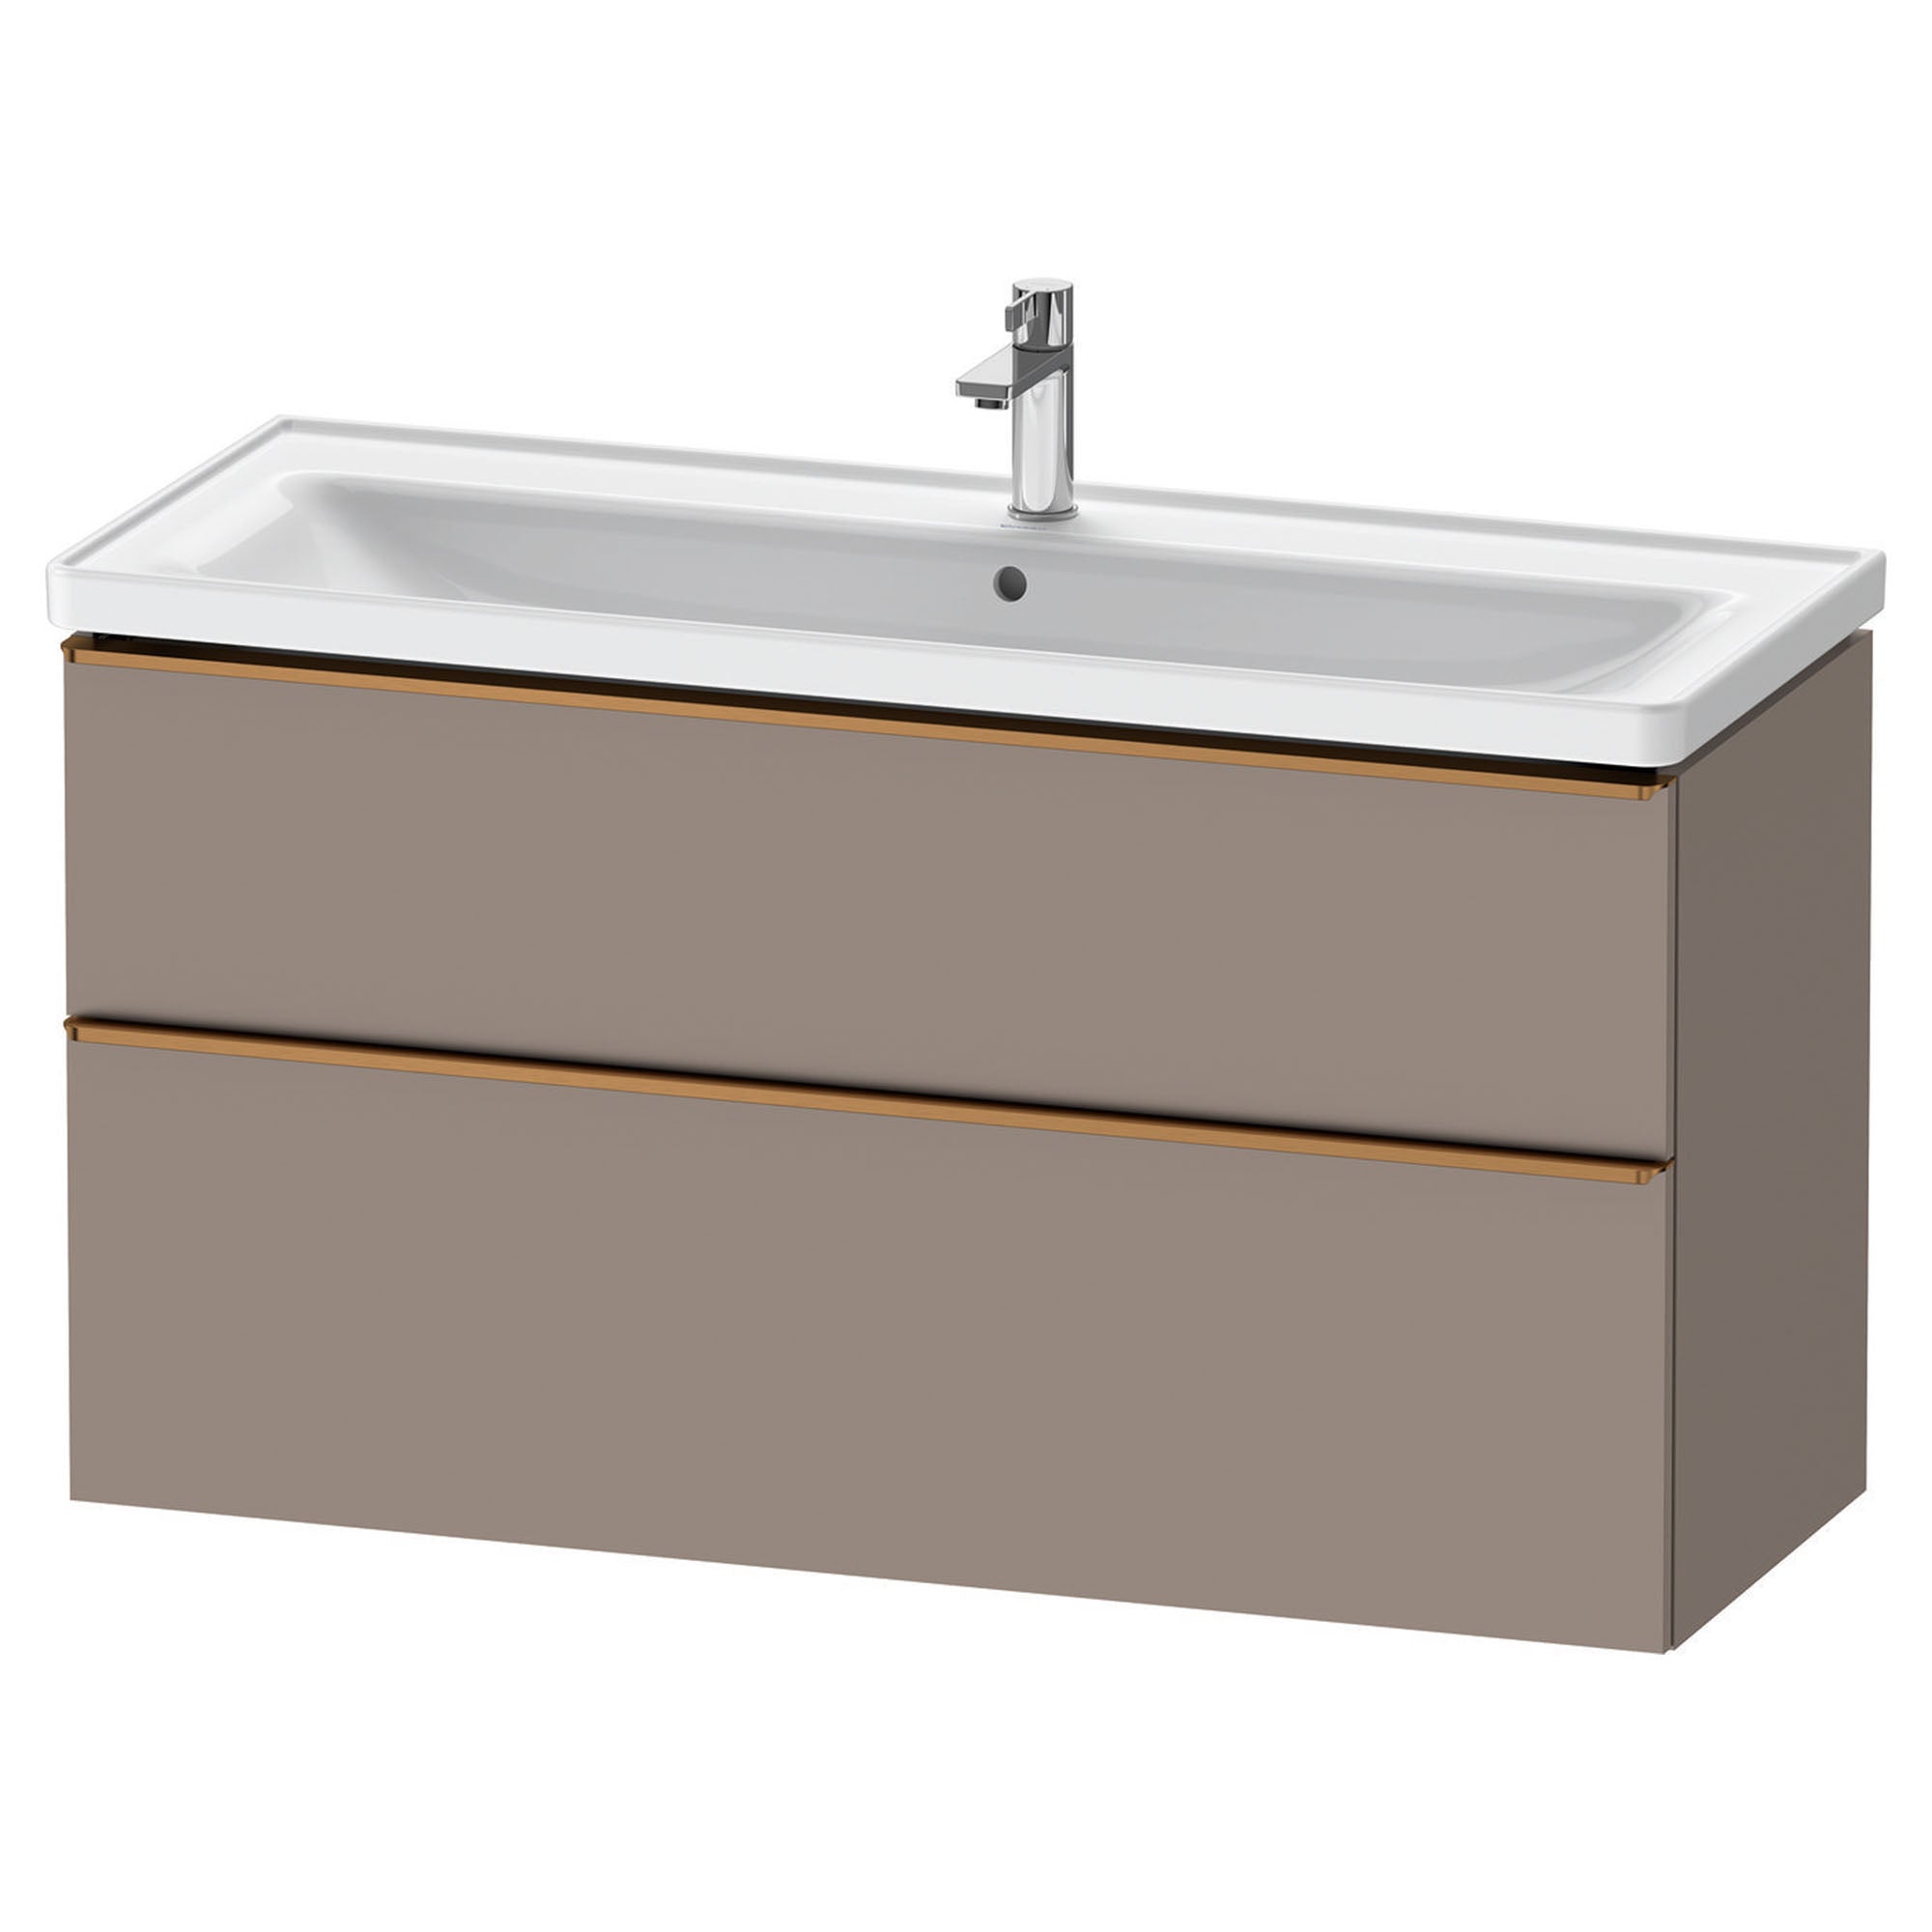 duravit d-neo 1200mm wall mounted vanity unit with d-neo basin basalt brushed bronze handles